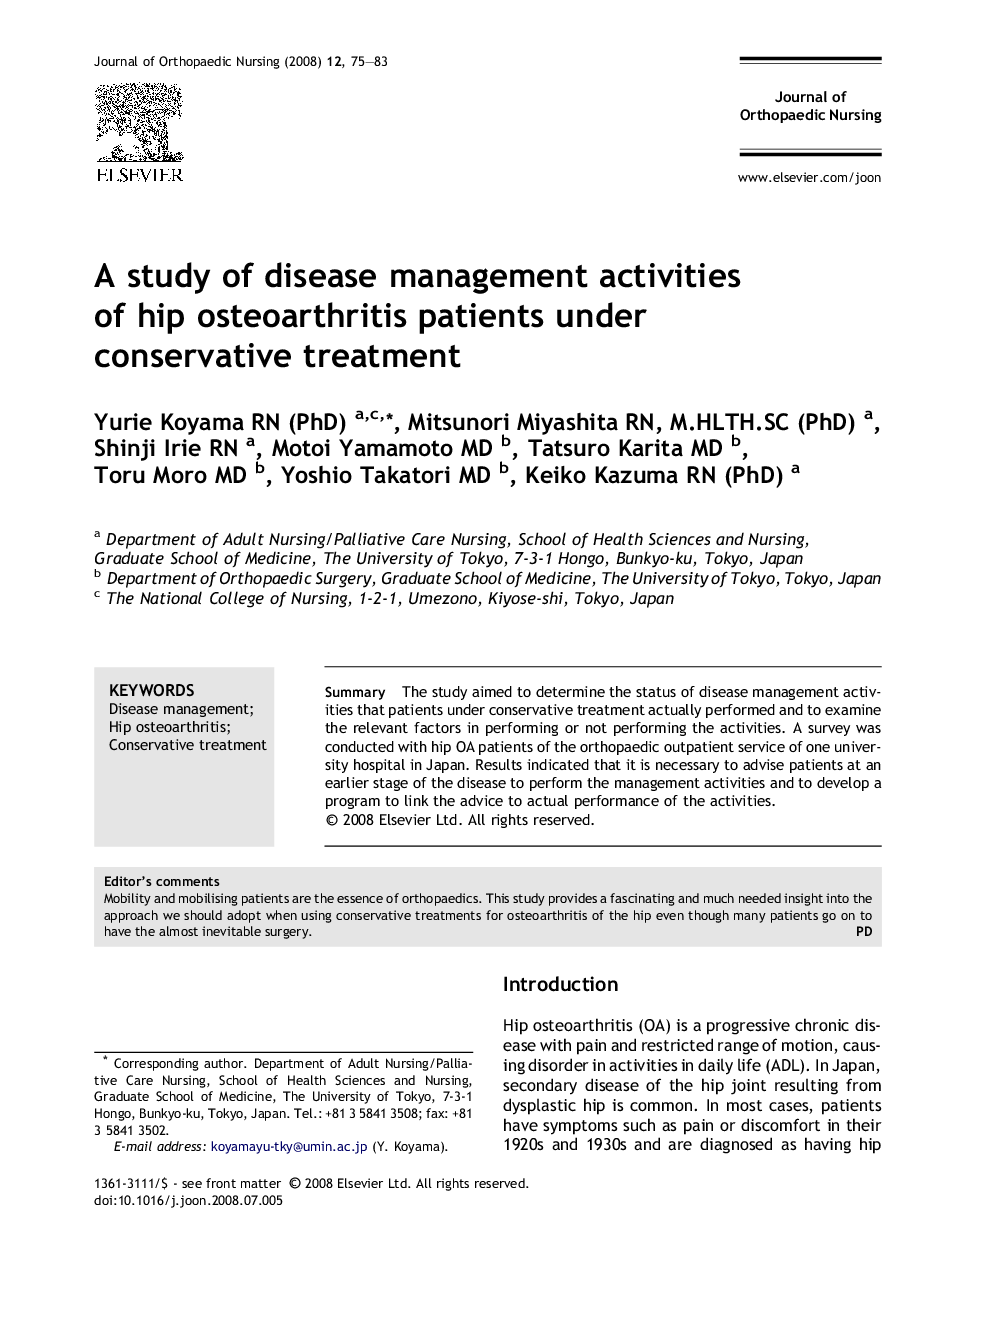 A study of disease management activities of hip osteoarthritis patients under conservative treatment